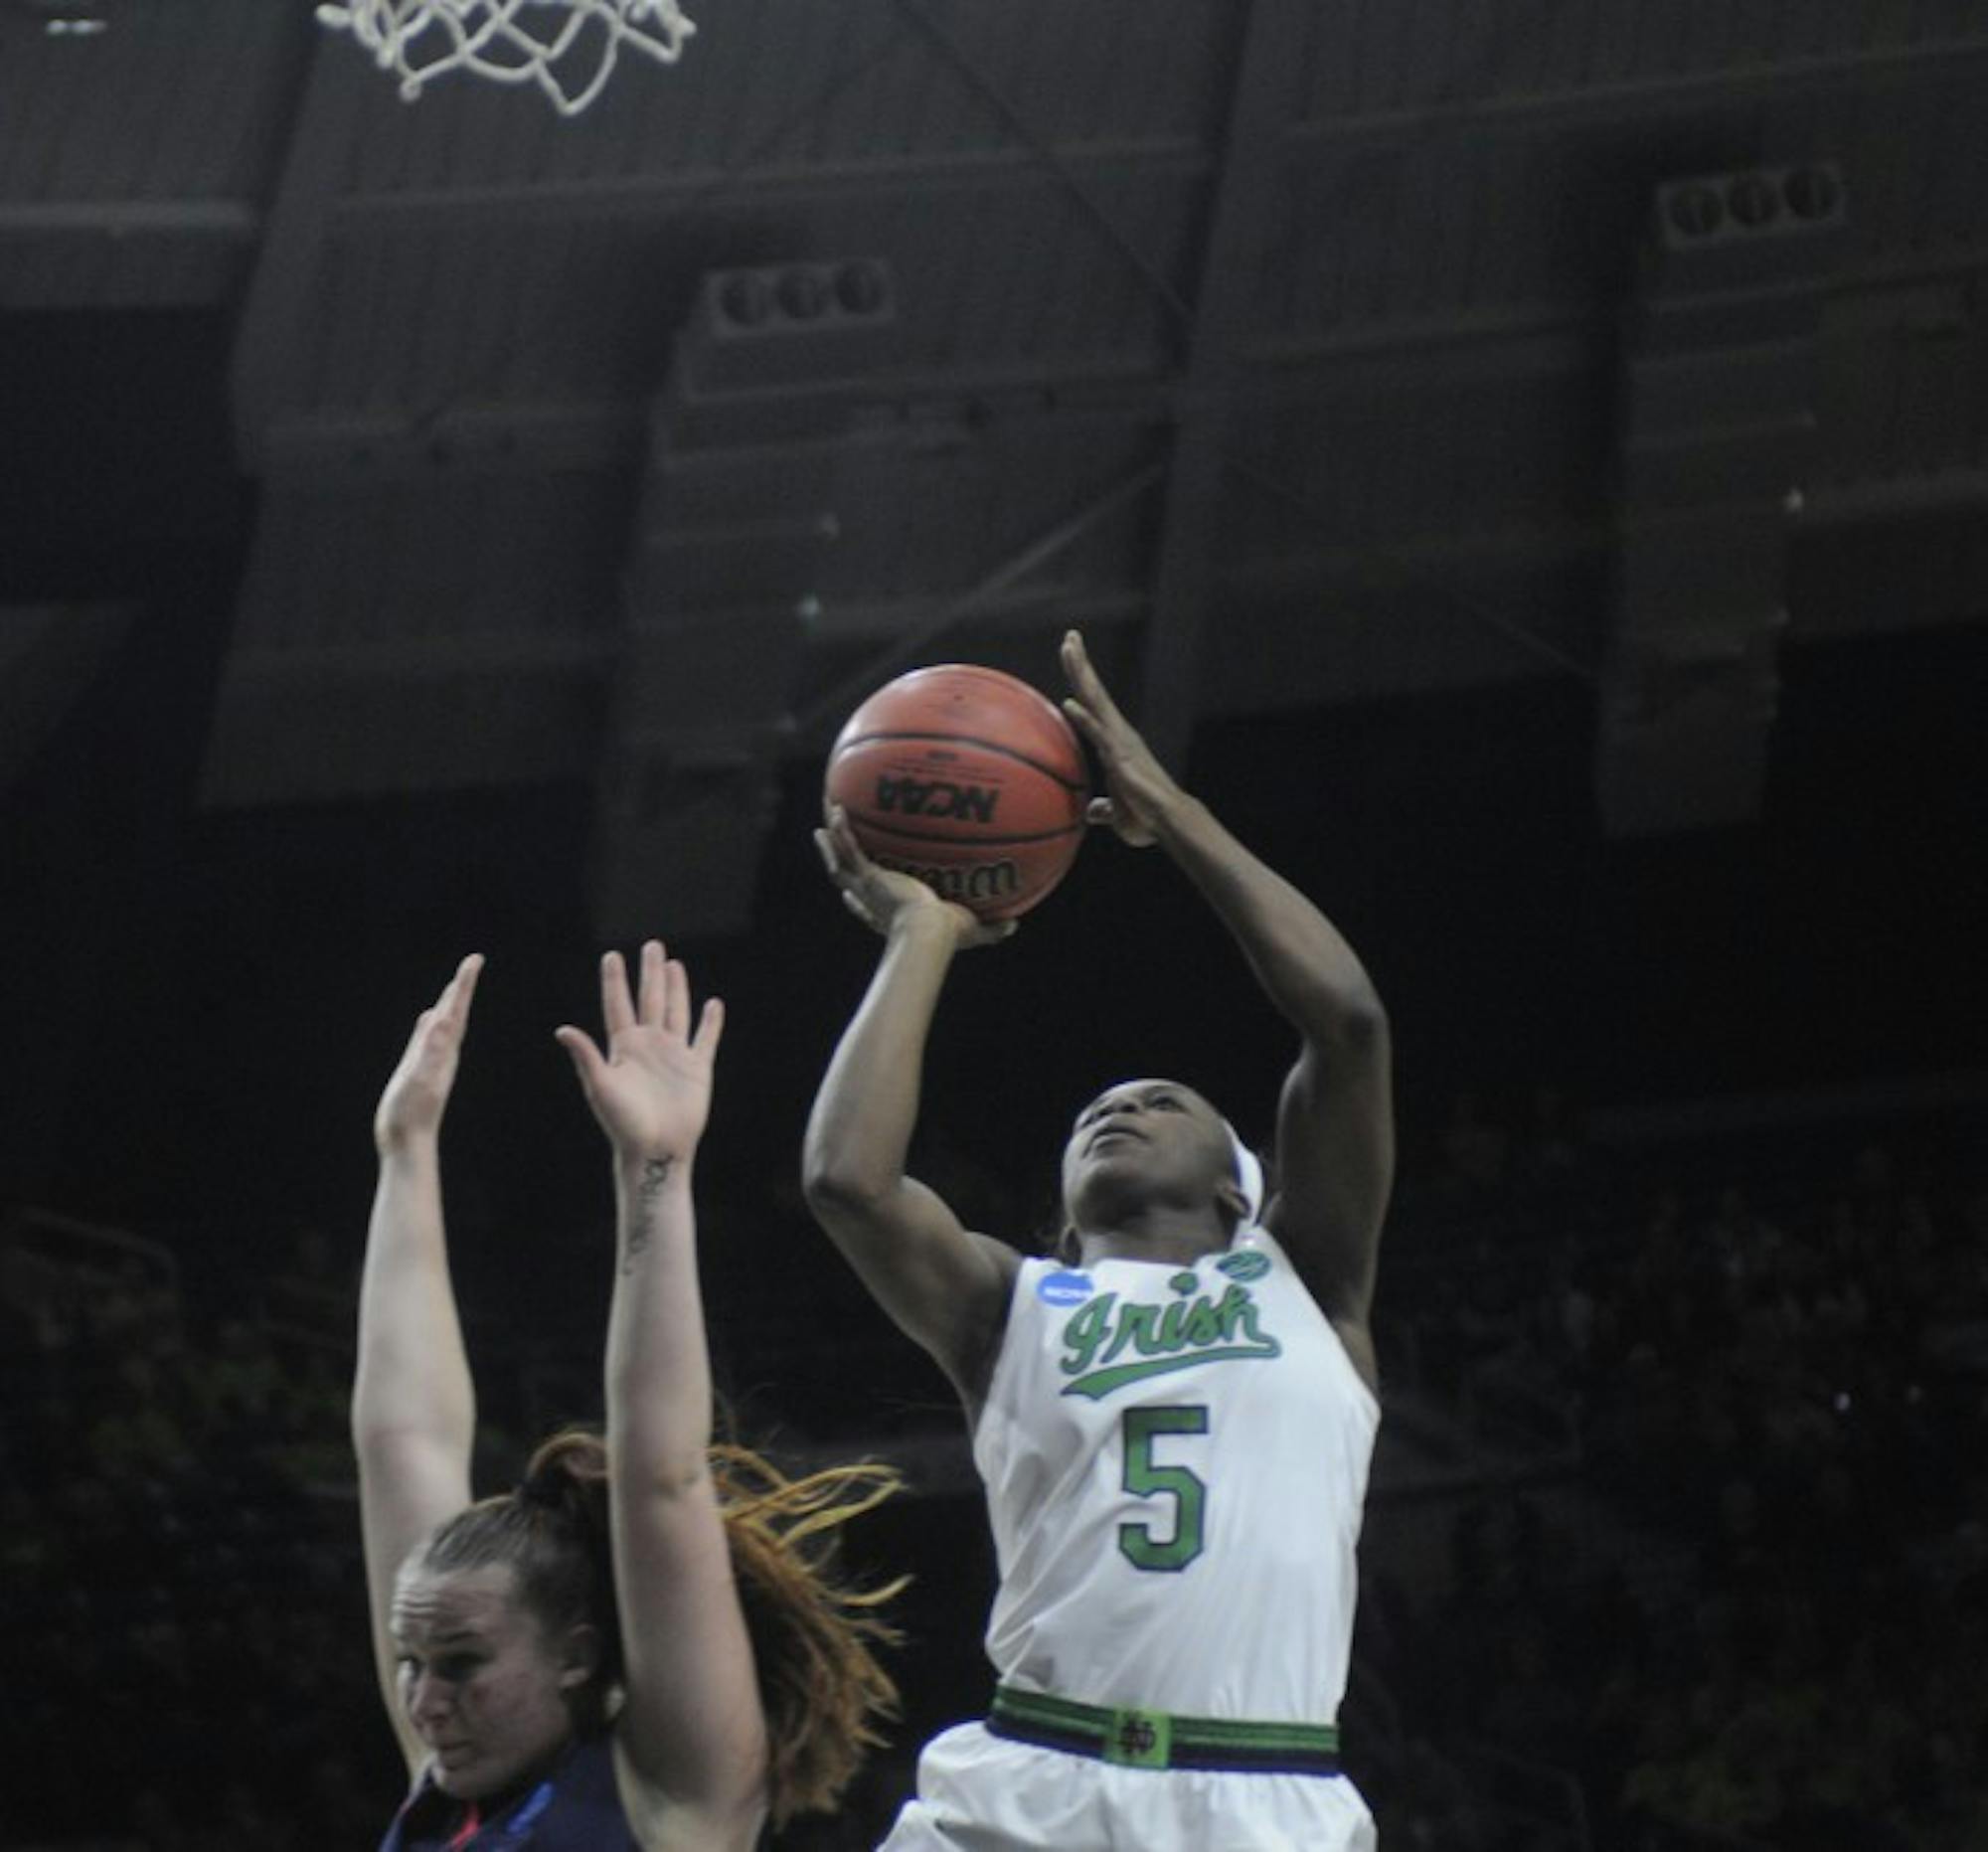 Irish freshman guard Jackie Young goes up for a layup during Notre Dame’s 79-49 win over Robert Morris on Friday at Purcell Pavilion.